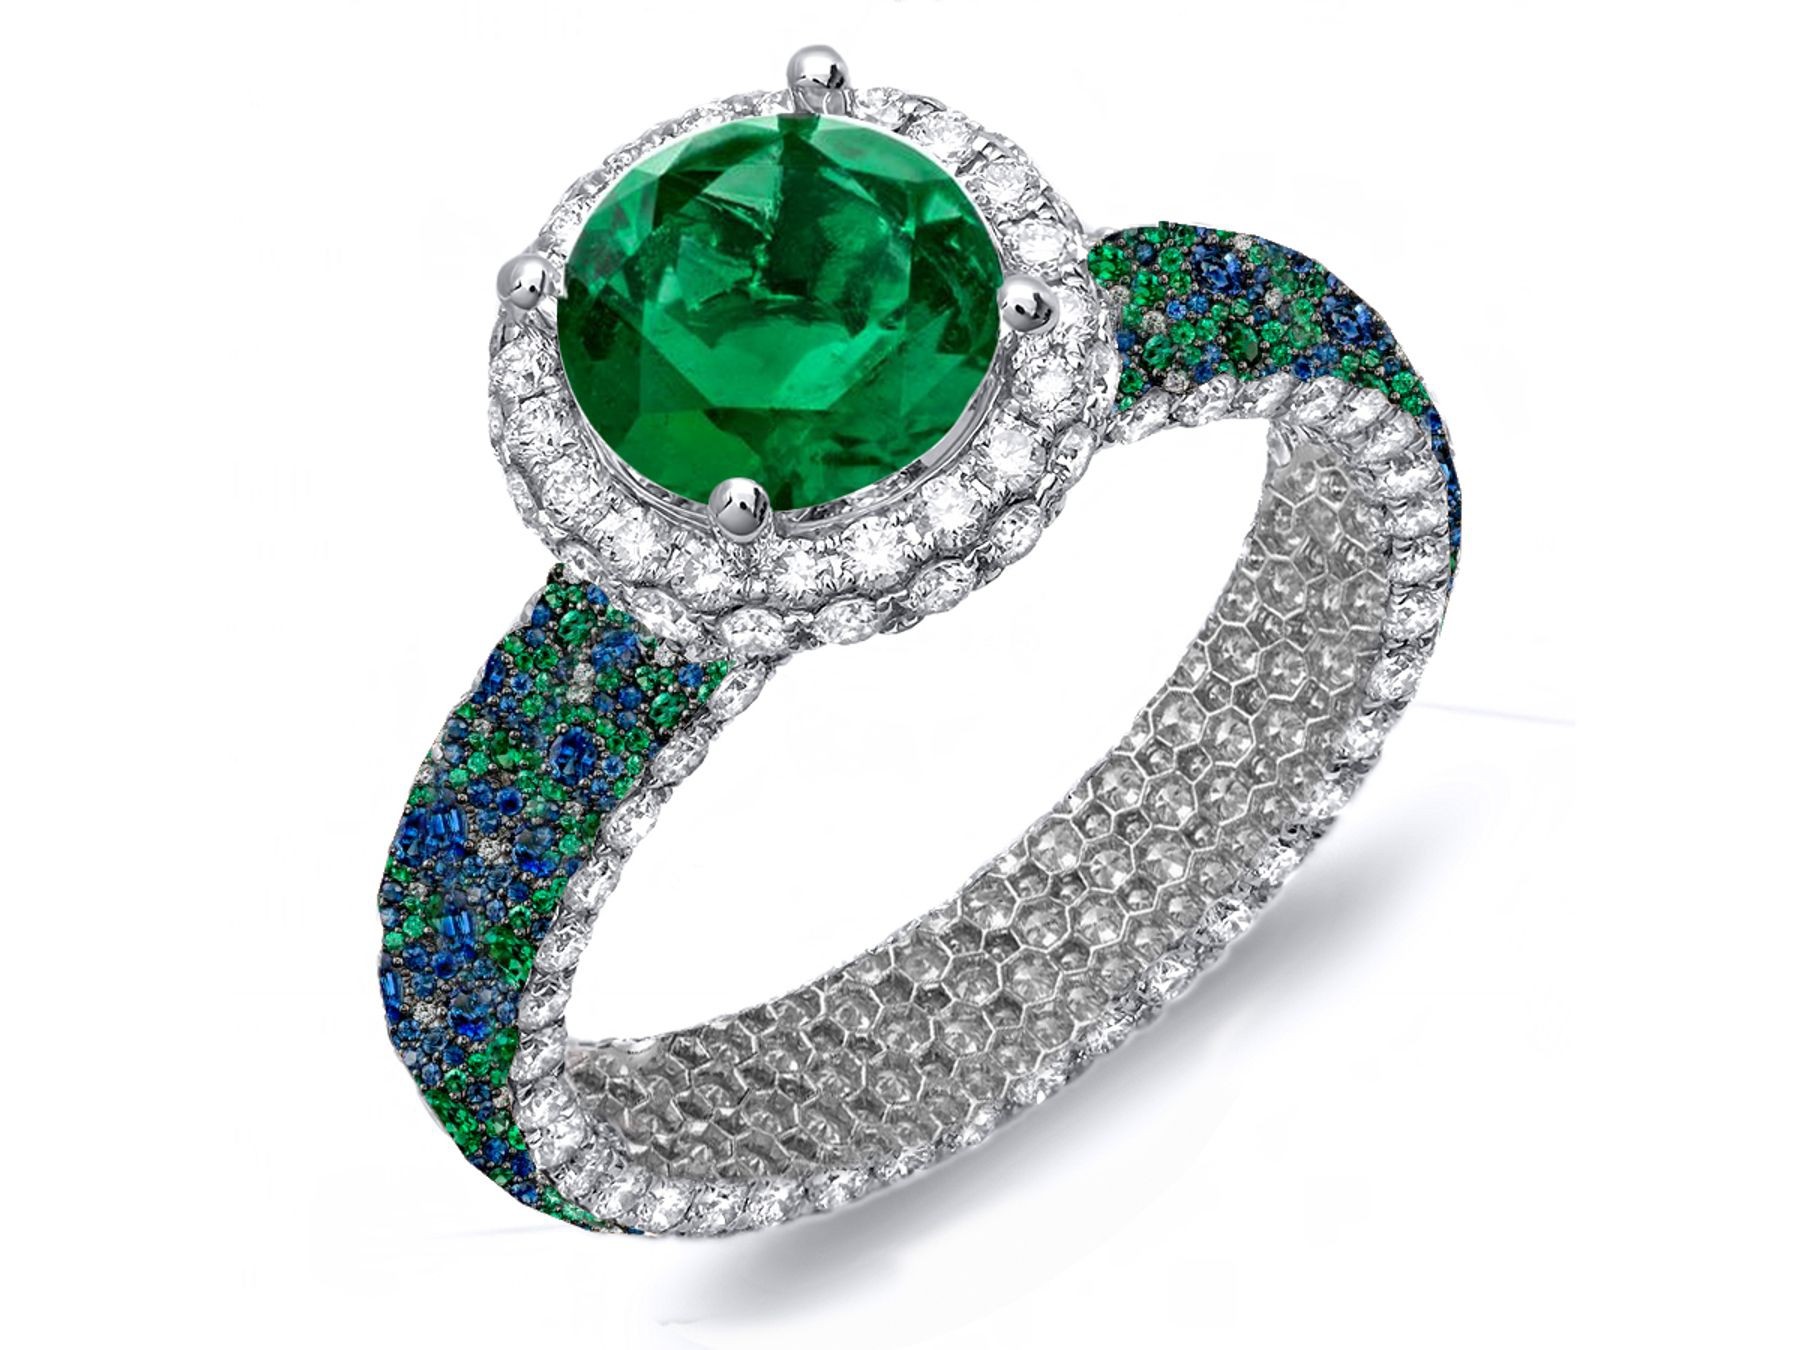 Made To Order Rings With French Pave Halo Brilliant Cut Round Diamonds & Emeralds